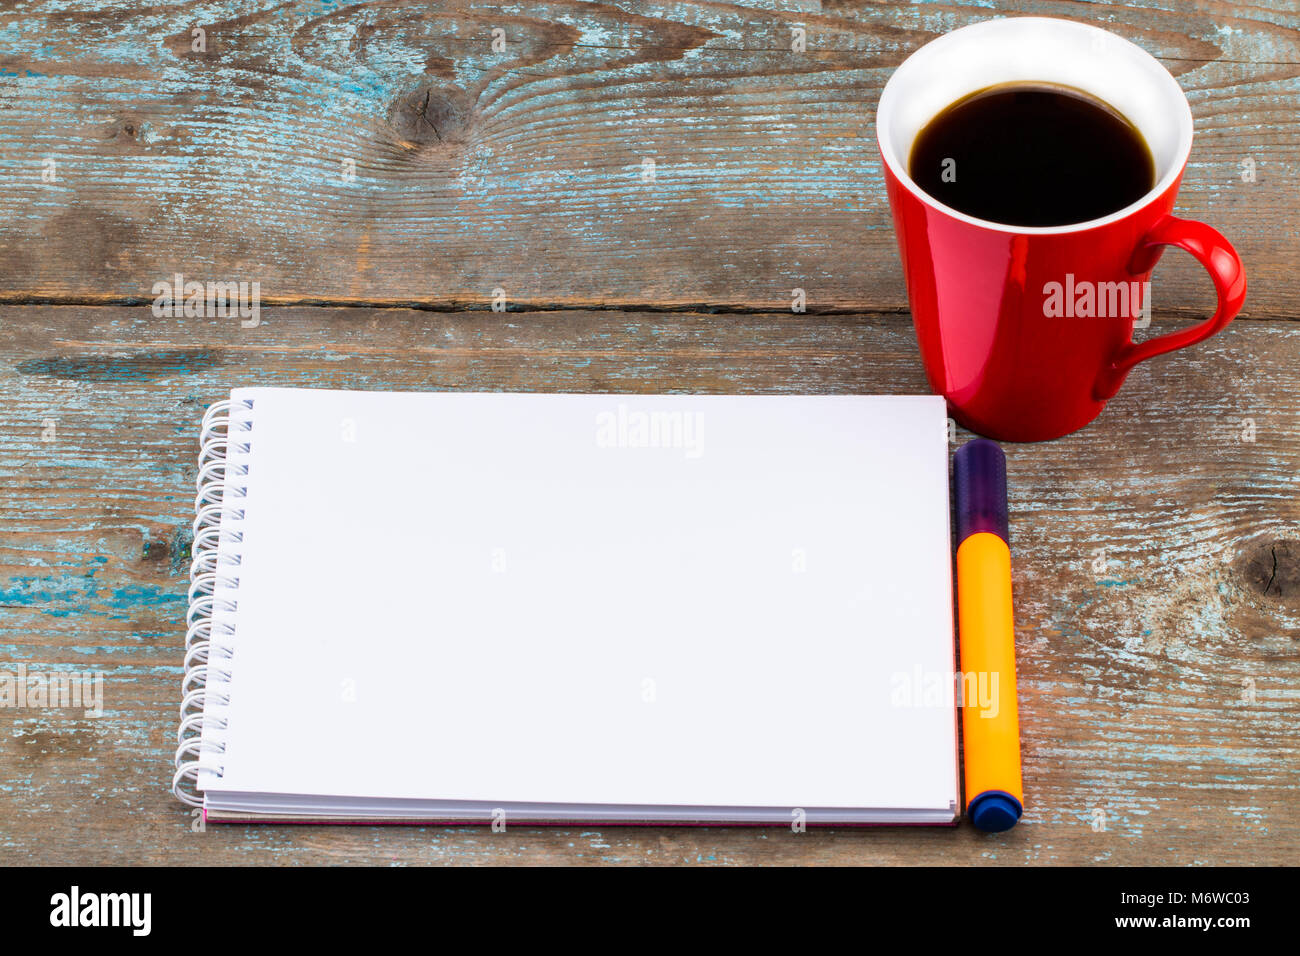 top view image of open notebook with blank pages next to cup of coffee on wooden table. ready for adding text or mockup. Stock Photo